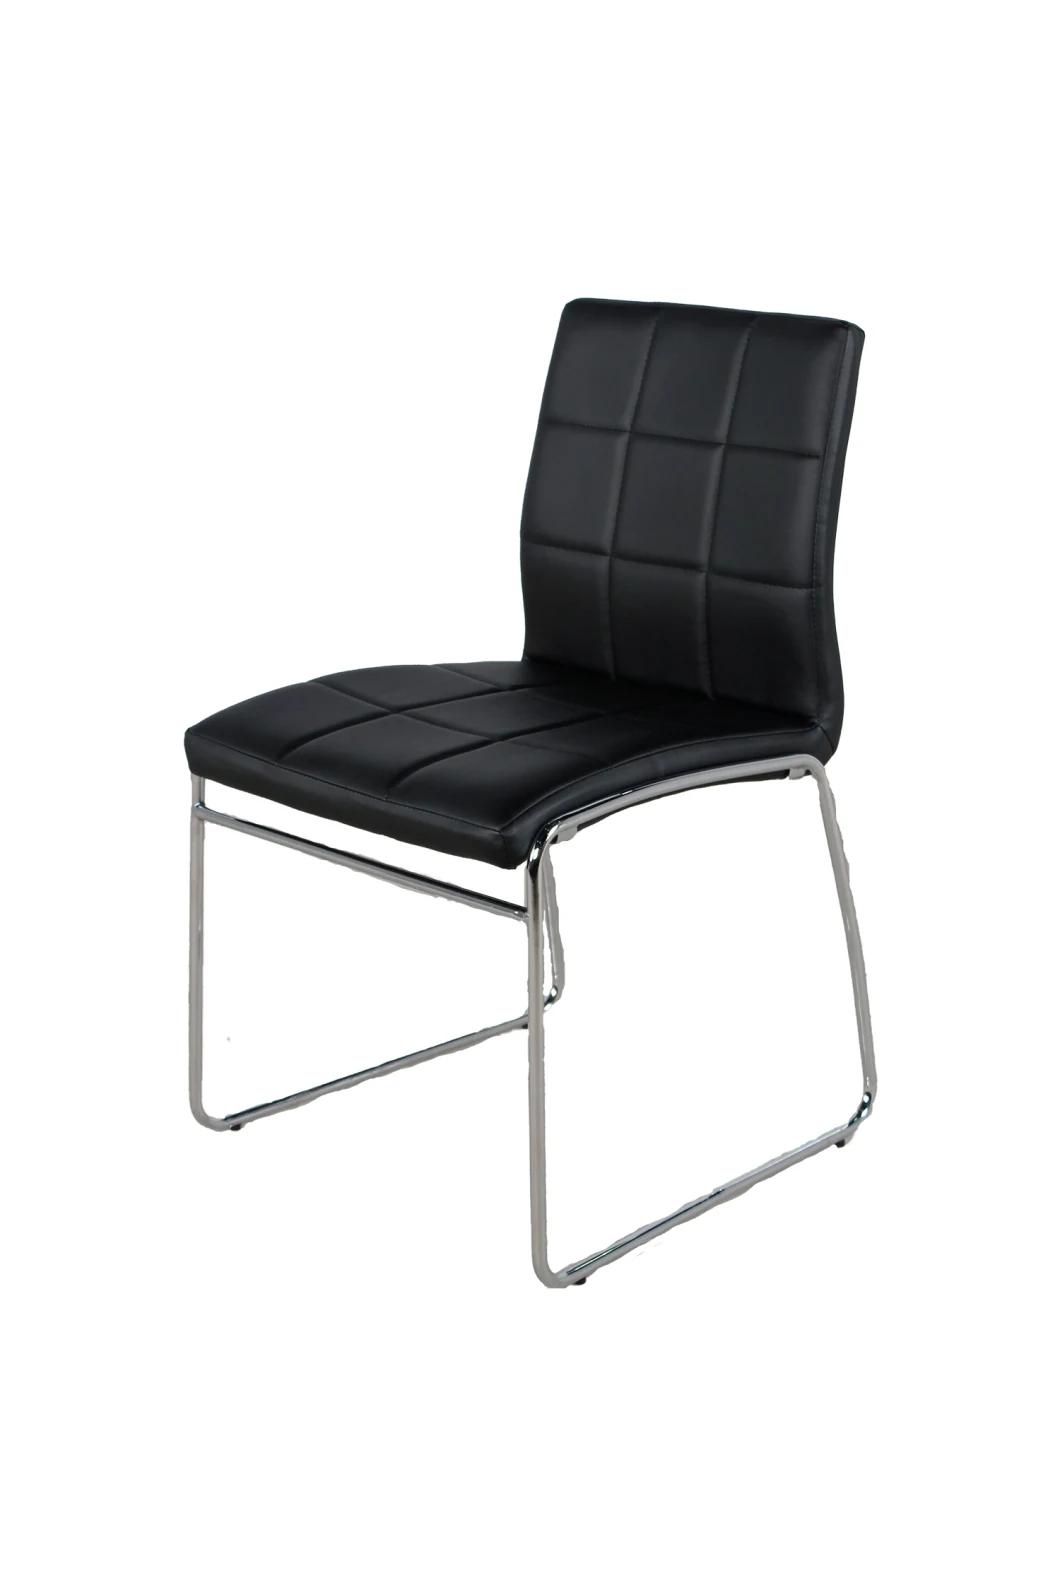 Home Office Restaurant Furniture PU Dining Room Chair with Electroplated Steel Tube Leg